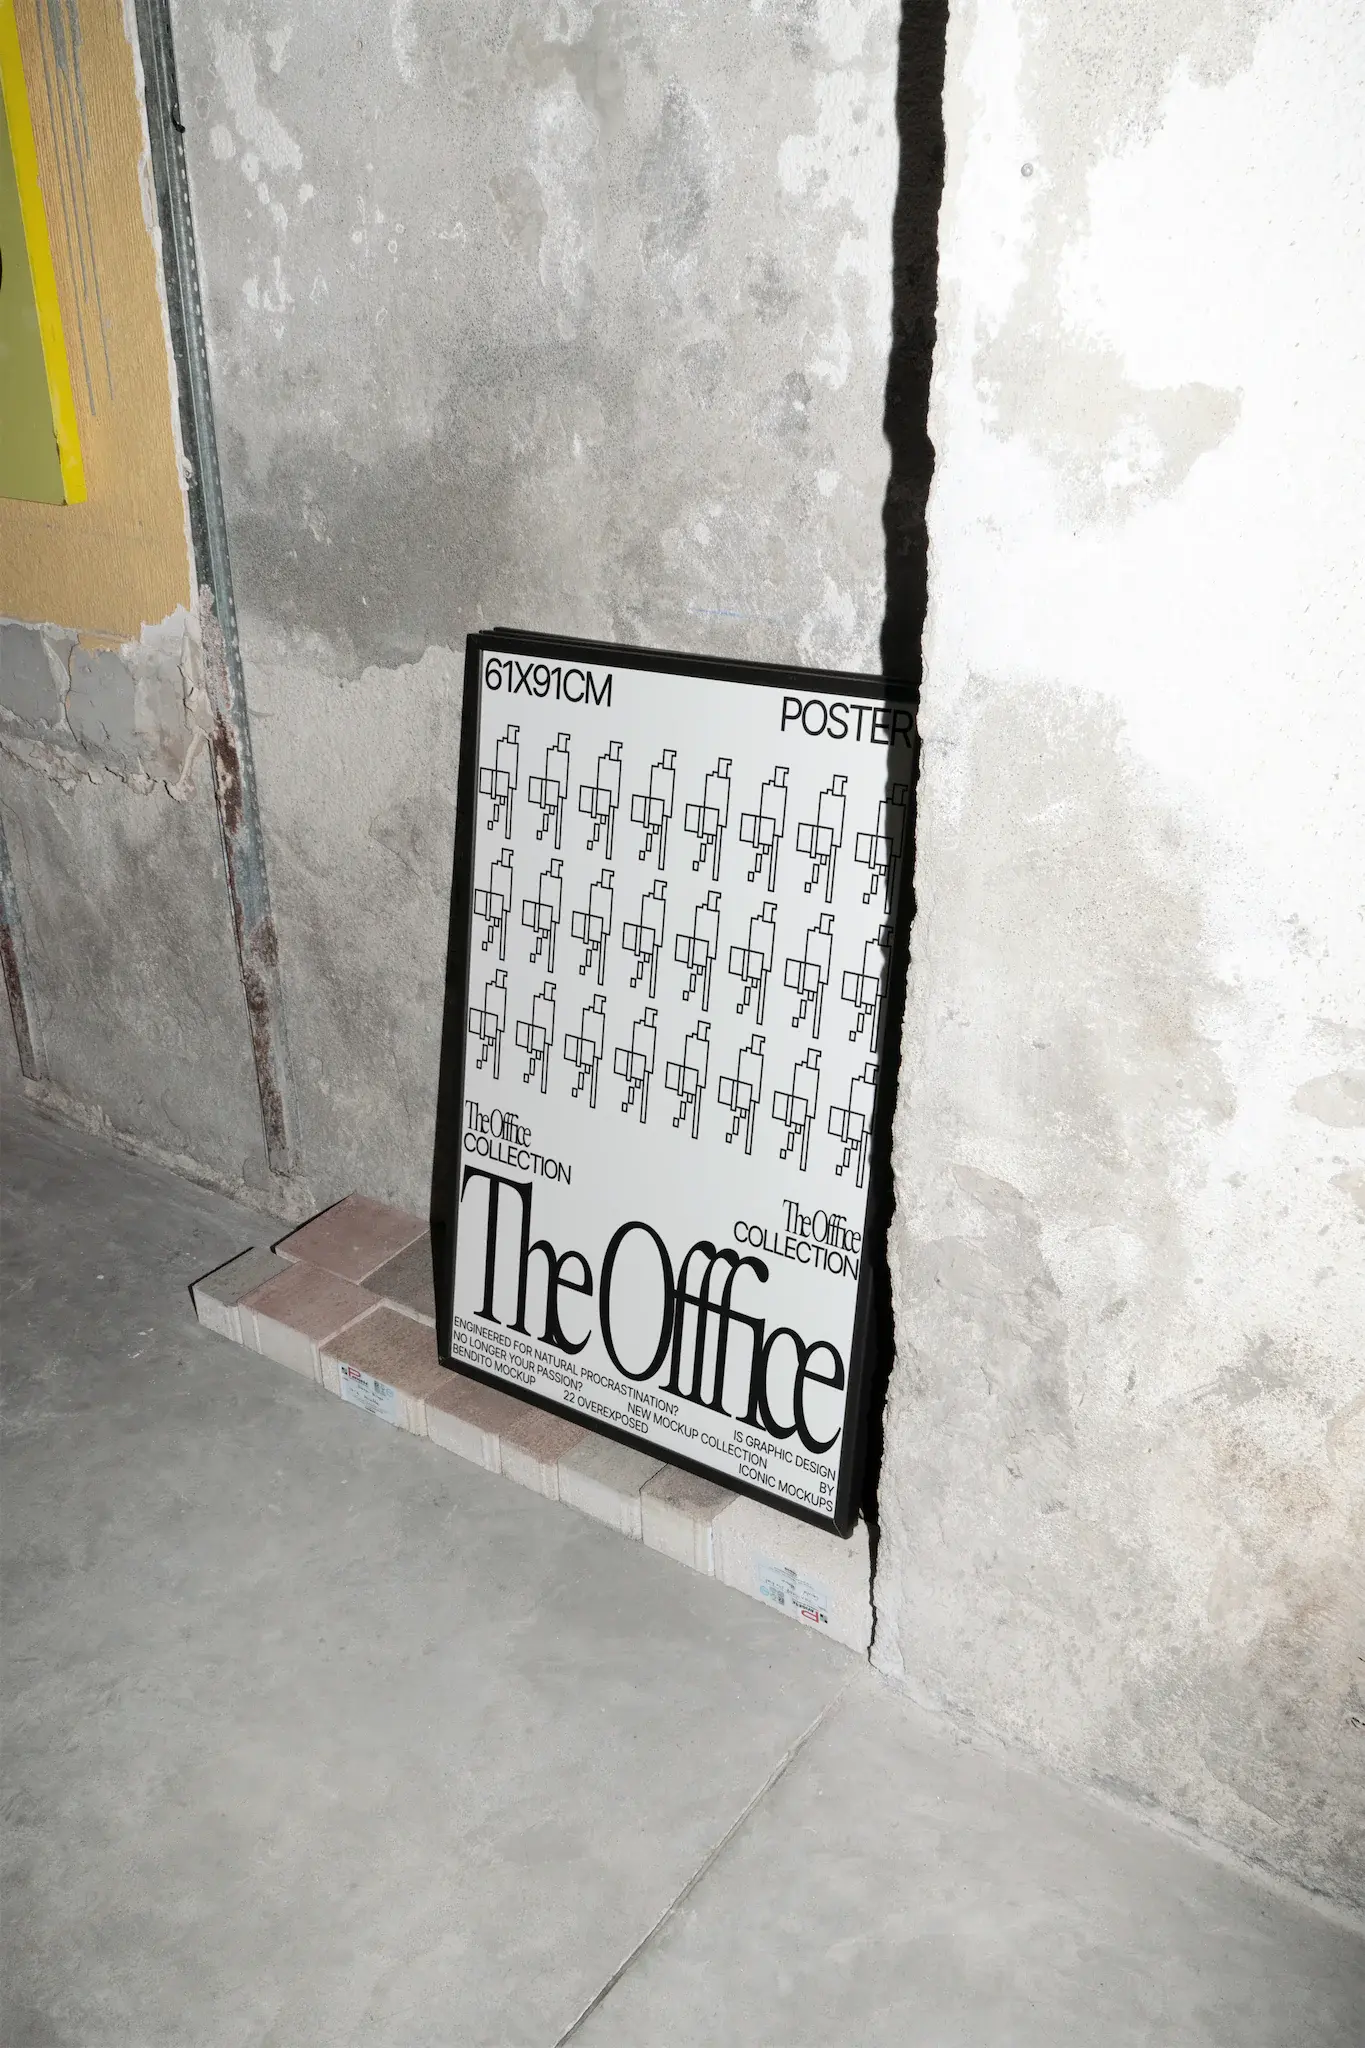 61x91cm framed poster mockup on top of bricks and leaning against a peeled wall